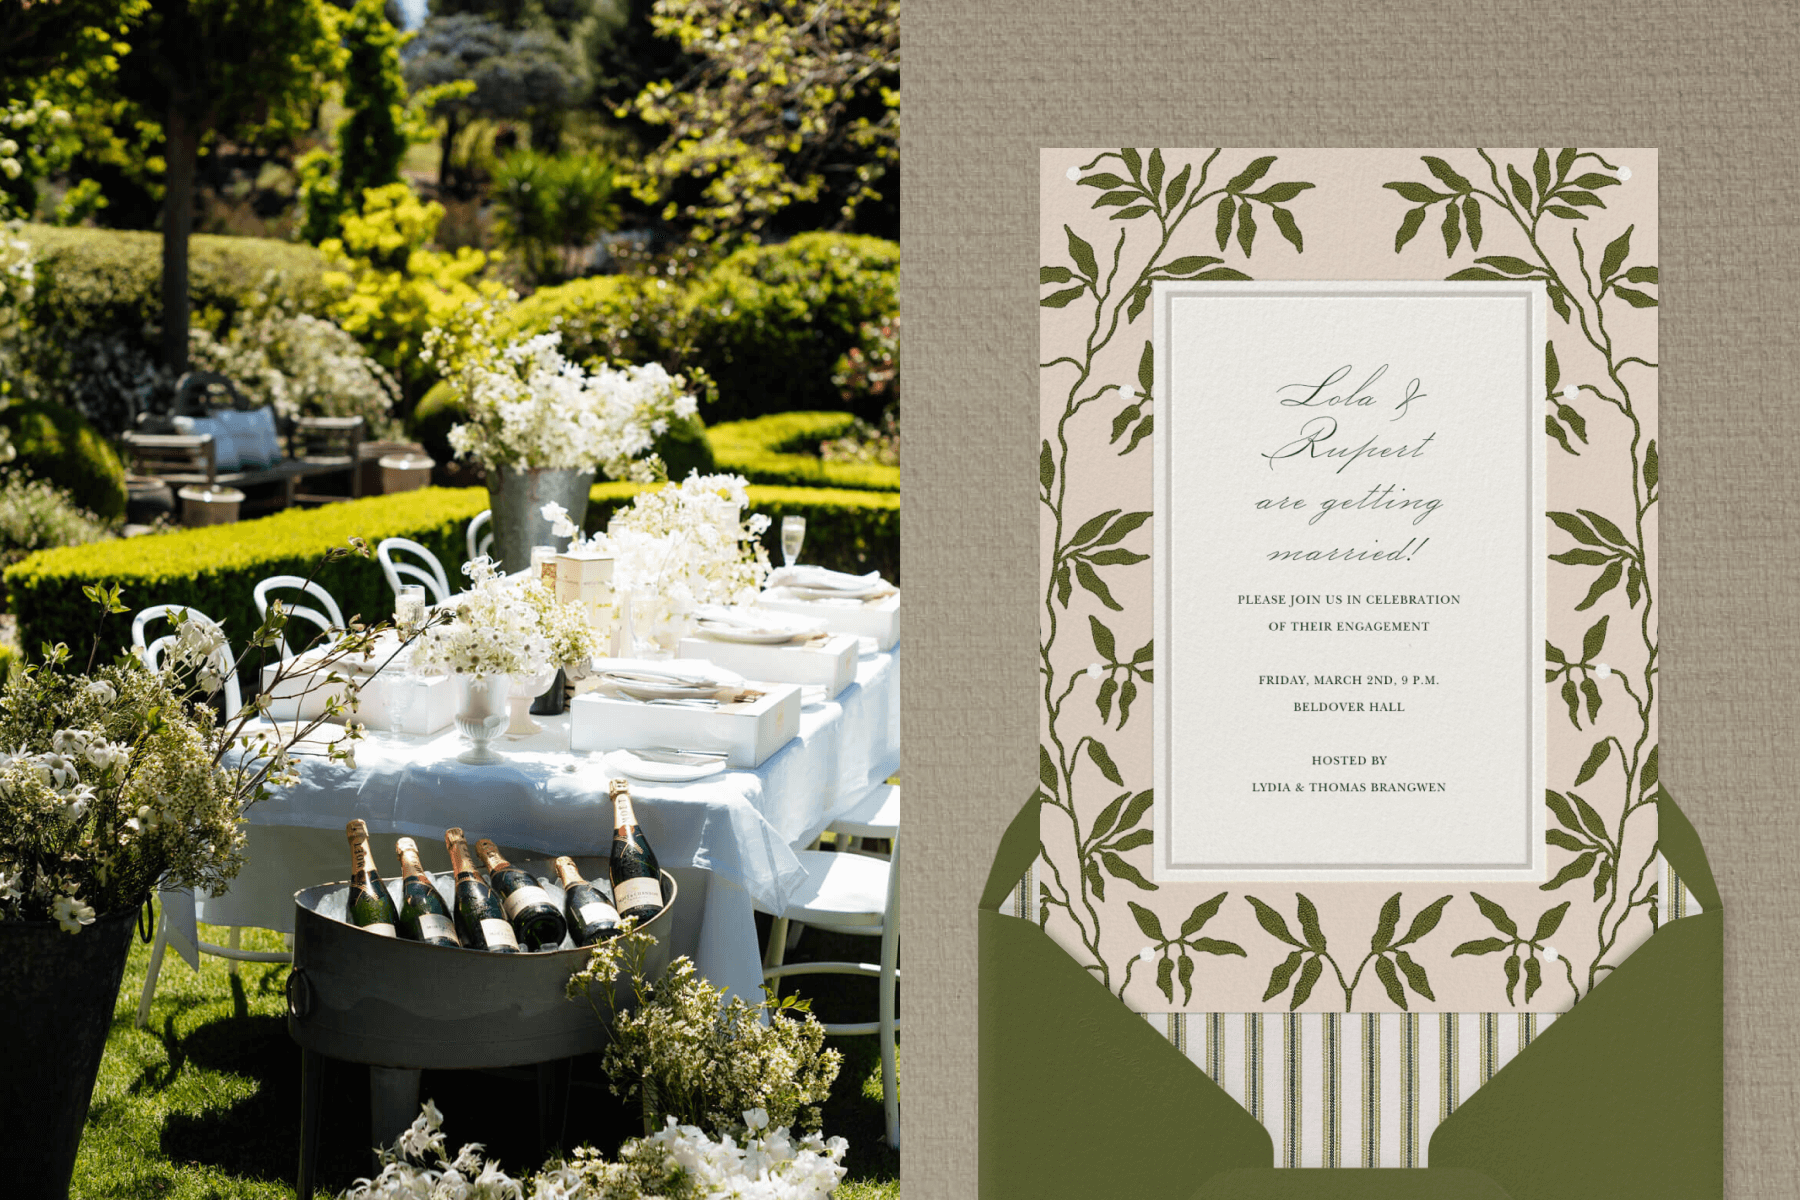 Left: A well-set table in a manicured garden. The decorations are white-on-white and there is a tub of champagne in the foreground. Right: A taupe engagement party invitation with a floral border. The invitation is paired with a grass green invitation with a vertical stripe patterned liner.